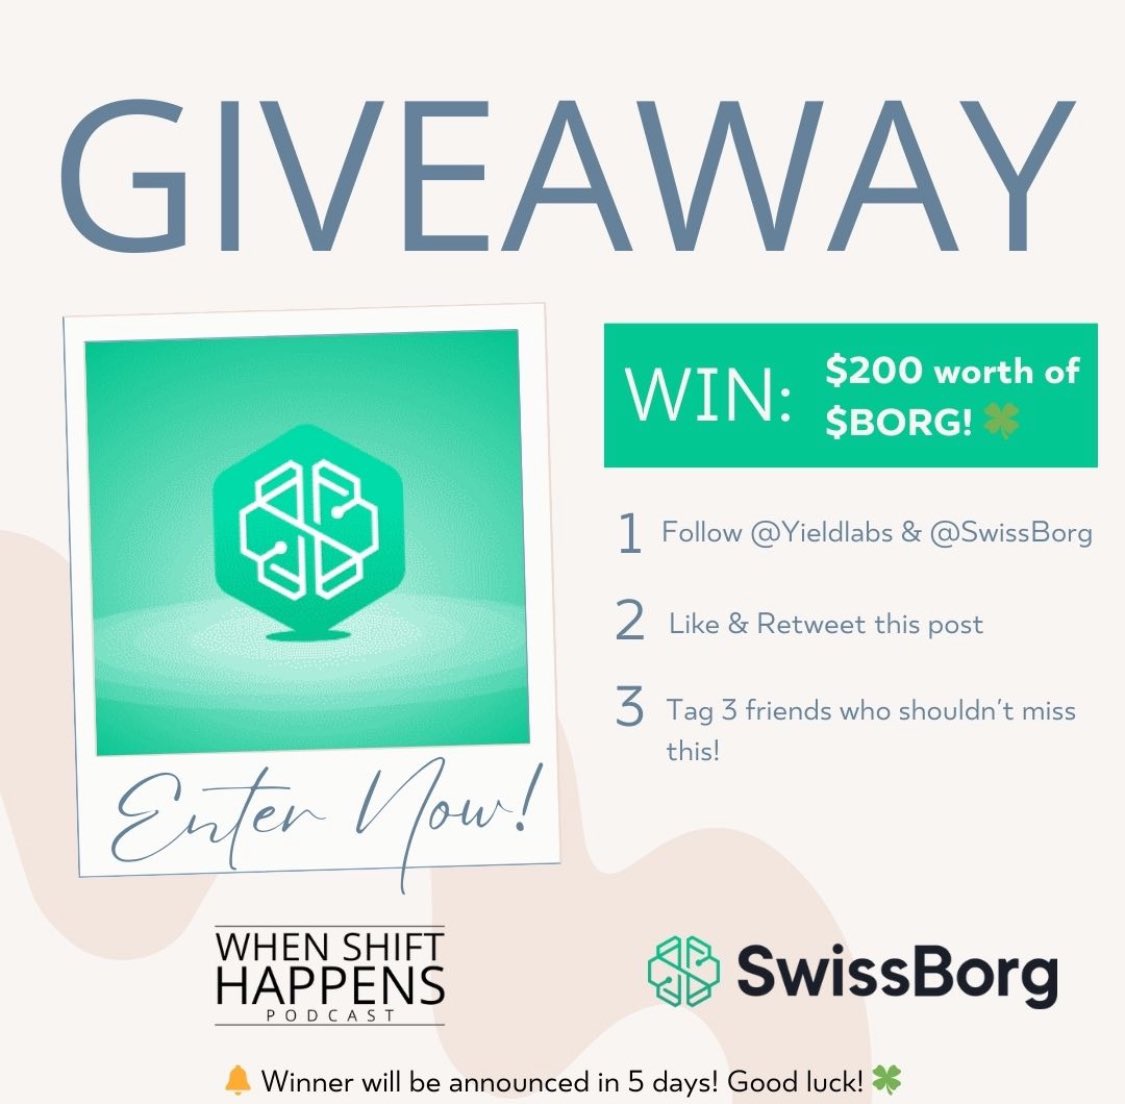 🍀 GIVEAWAY ALERT! 🍀 To celebrate our last Podcast Release with @swissborg , we are giving away 800 $BORG tokens! How to enter: 1️⃣ Follow @KevinWSHPod & @swissborg 2️⃣ Like & RT this tweet 3️⃣ Tag 3 friends who shouldn't miss this! 🔔 Winner announced in 5 days! Good luck! 🍀